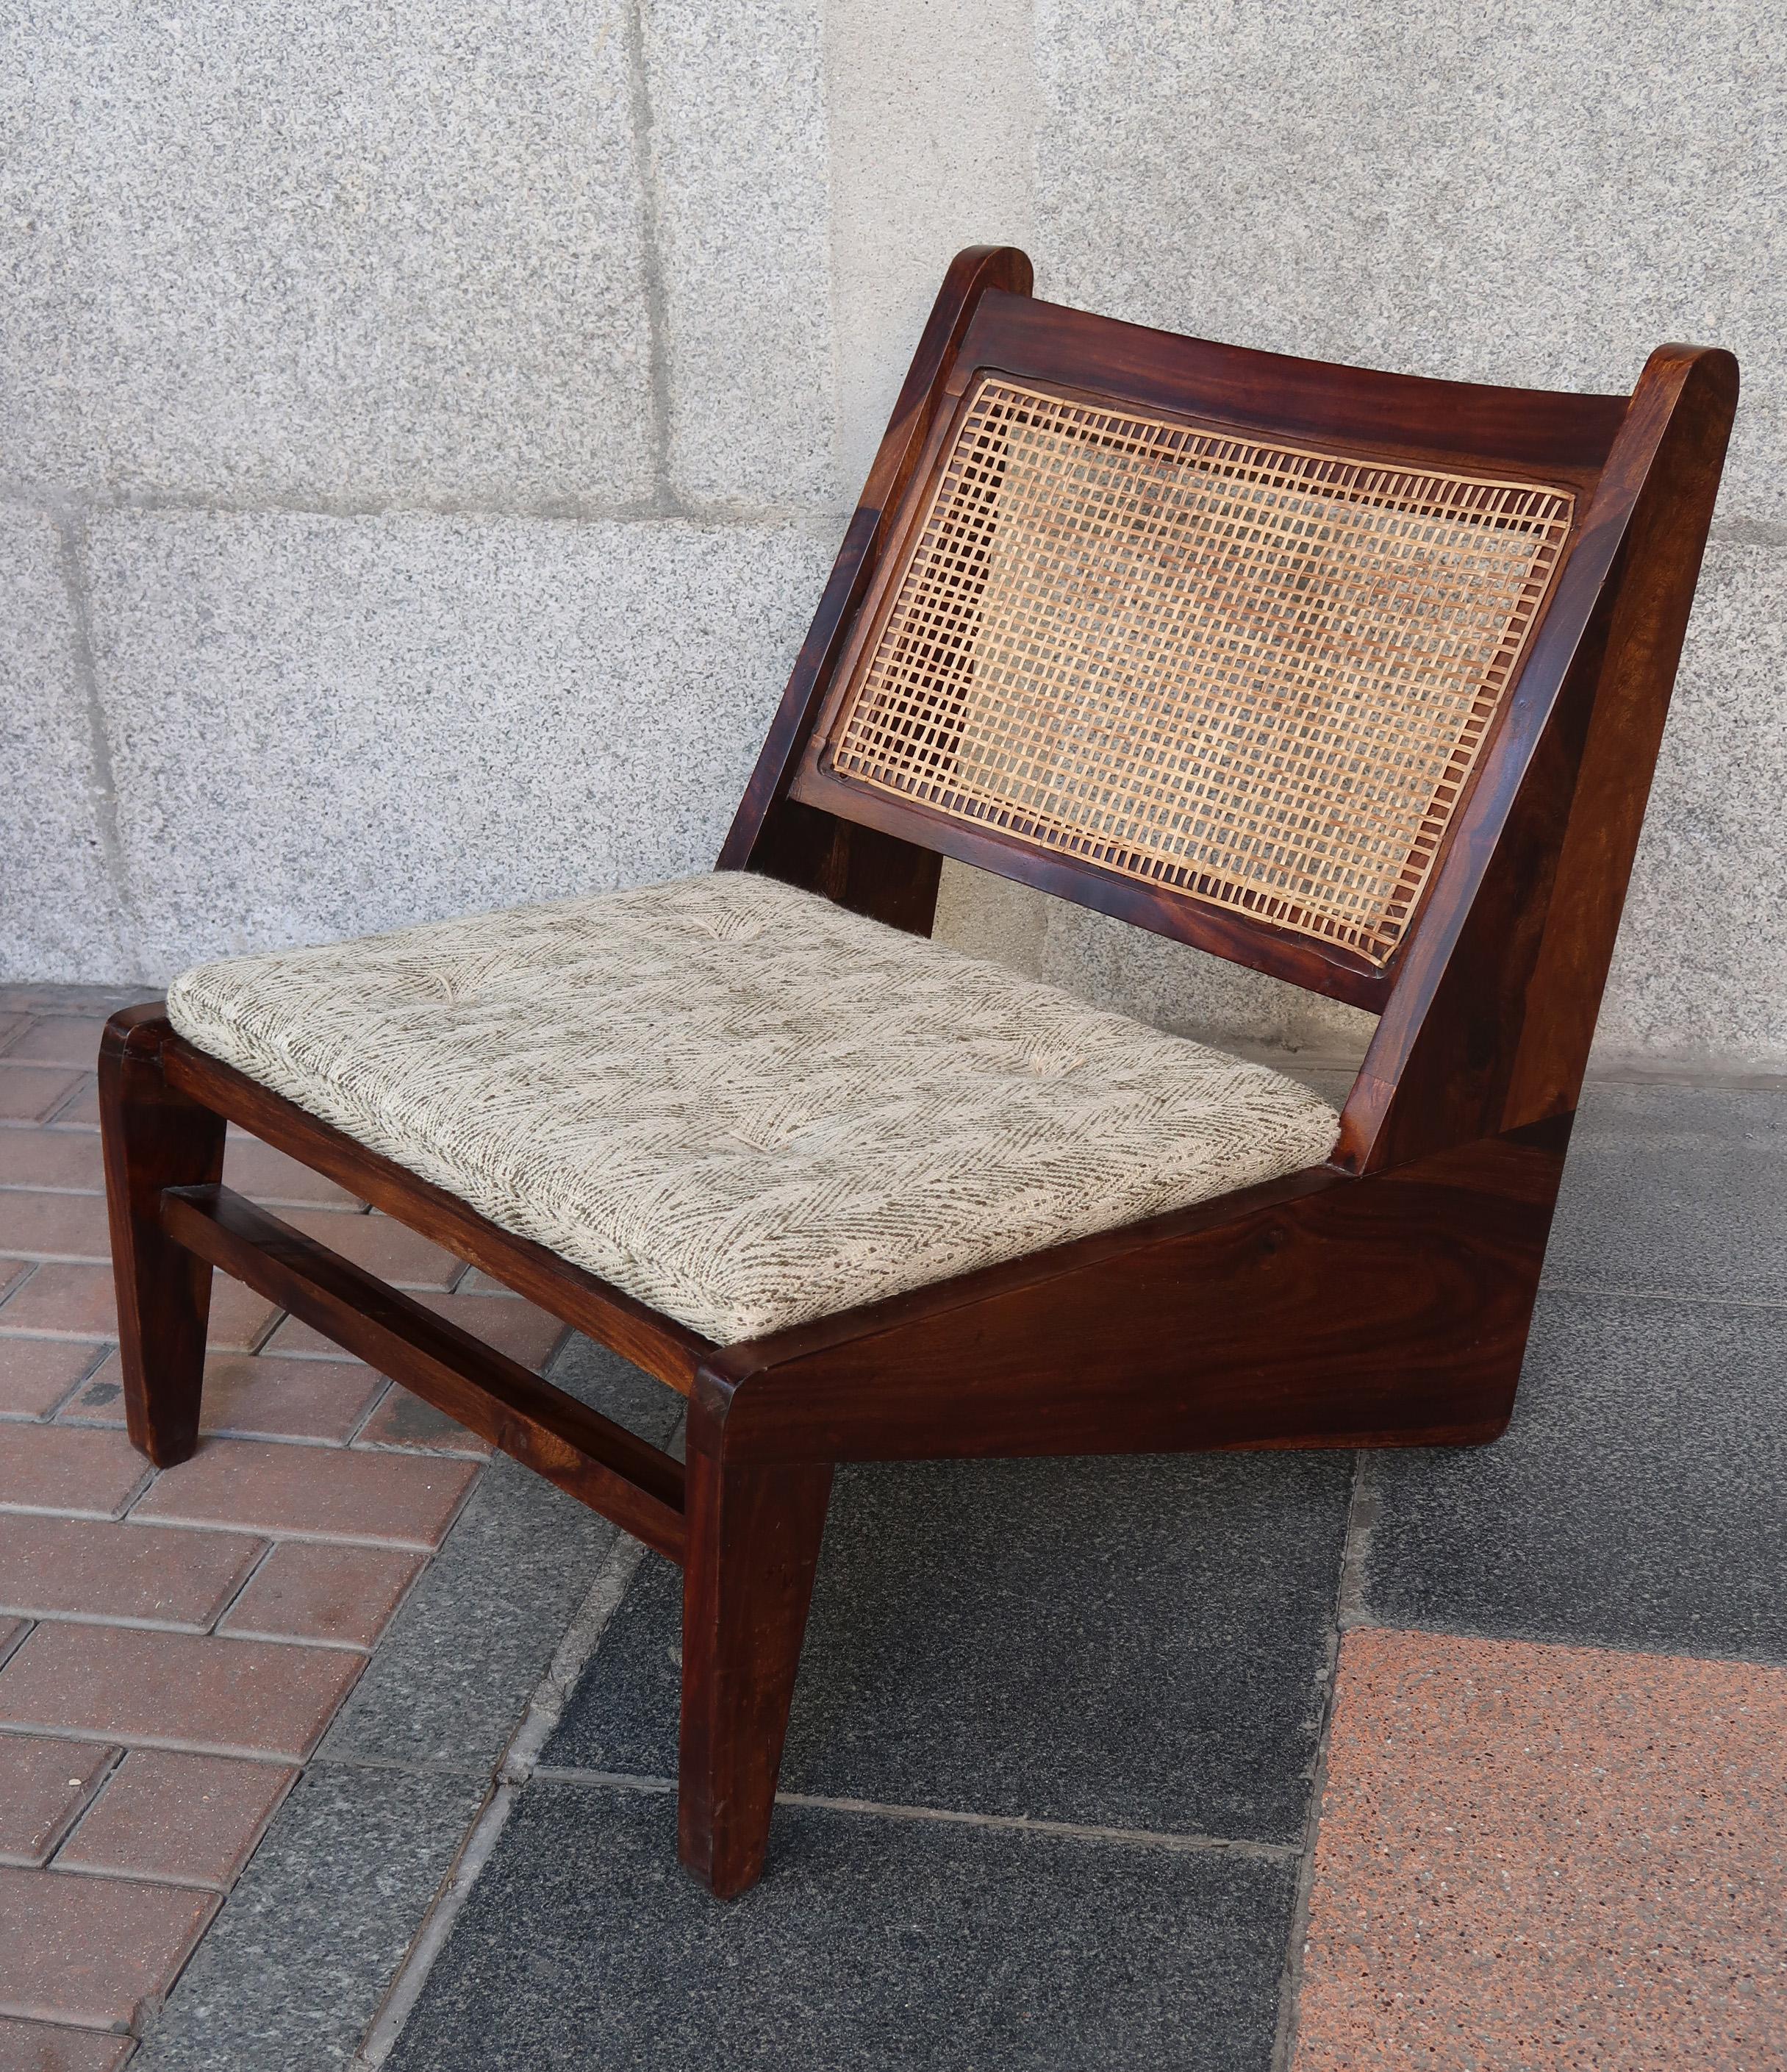 Kangourou lounge chair in the style of Jeanneret, Chandigarh, India, 20th century. A rosewood and bamboo lounge chair.